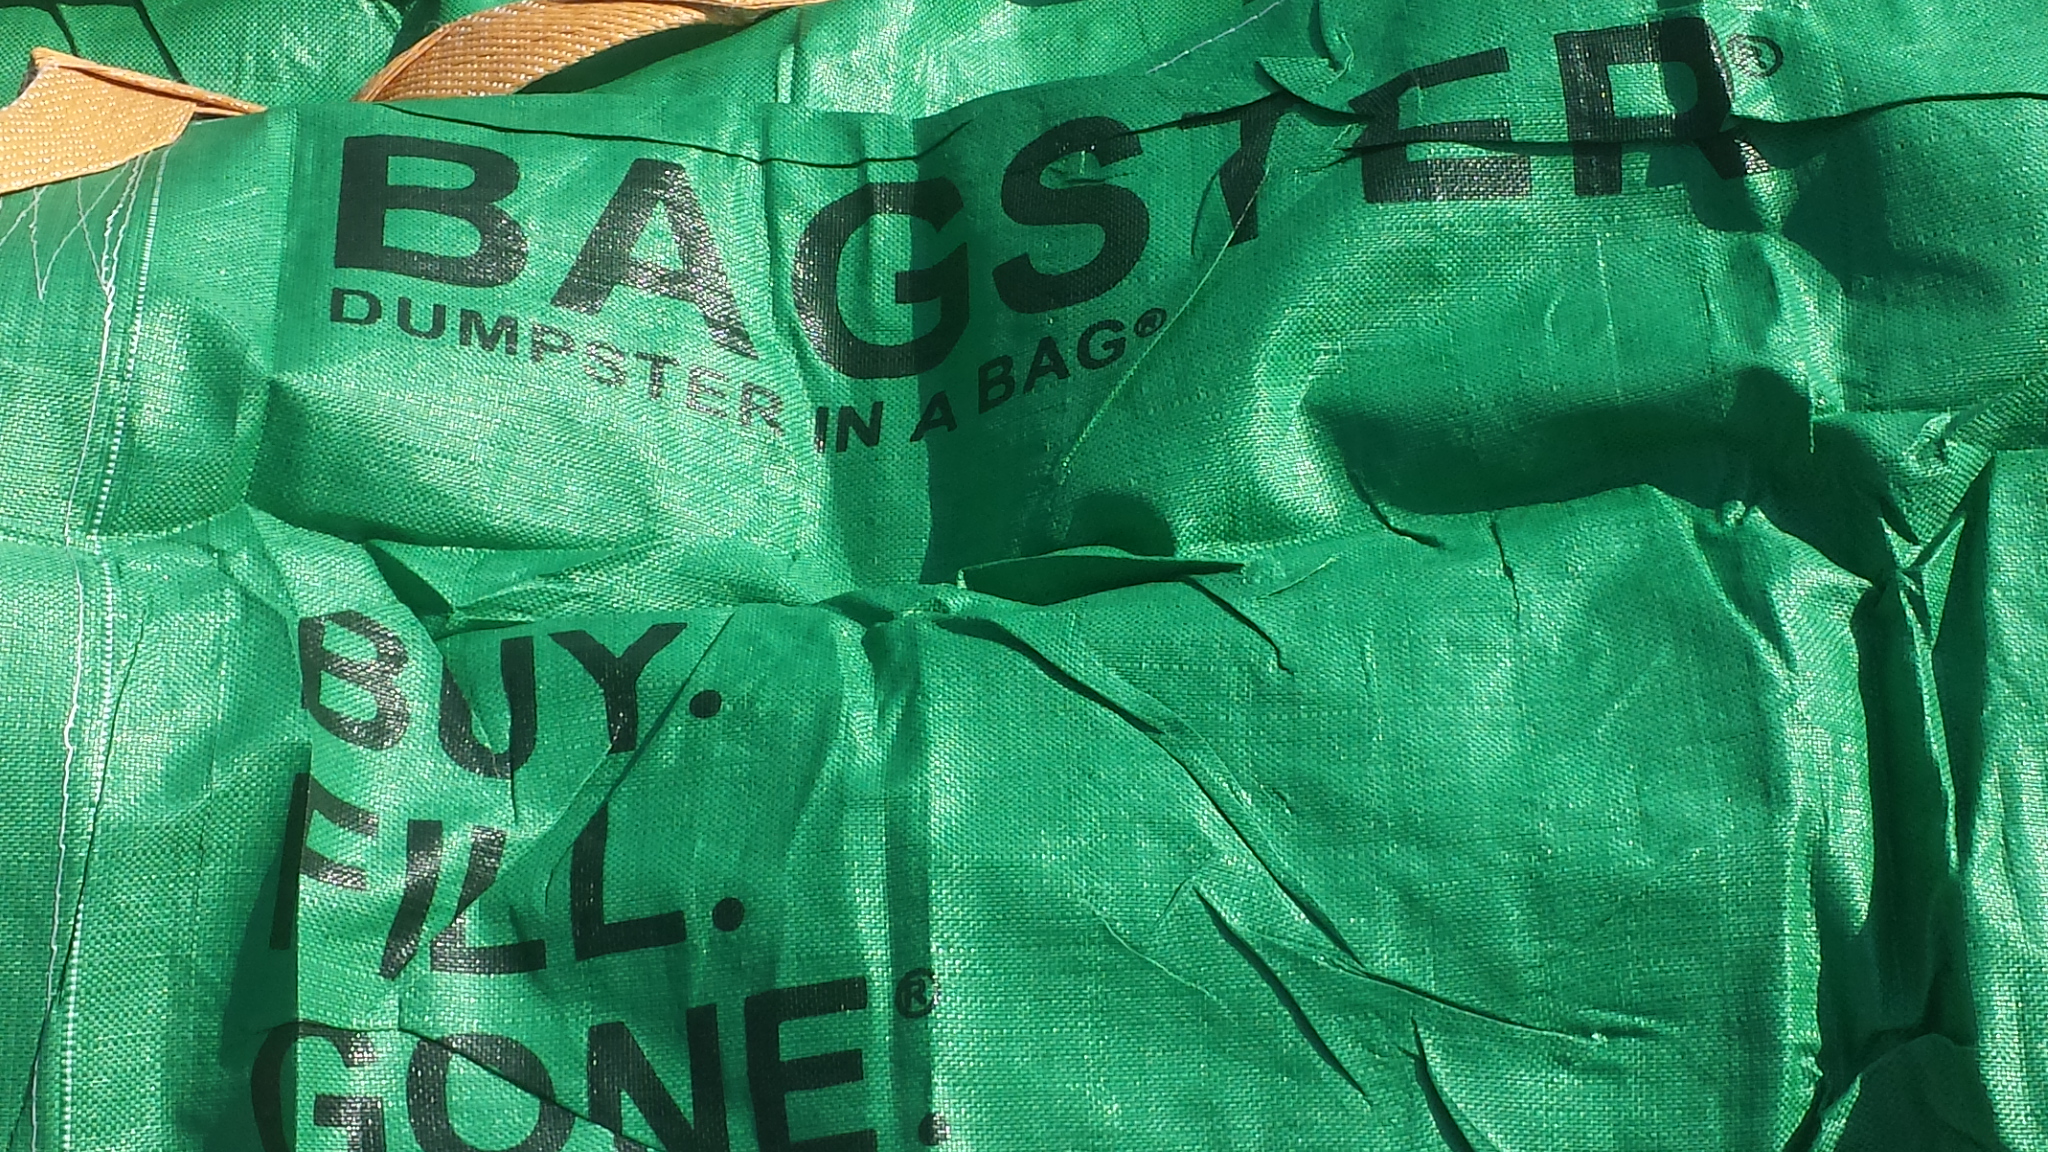 Reviews for WM Bagster Dumpster in a Bag (Holds up to 3,300 lb.)